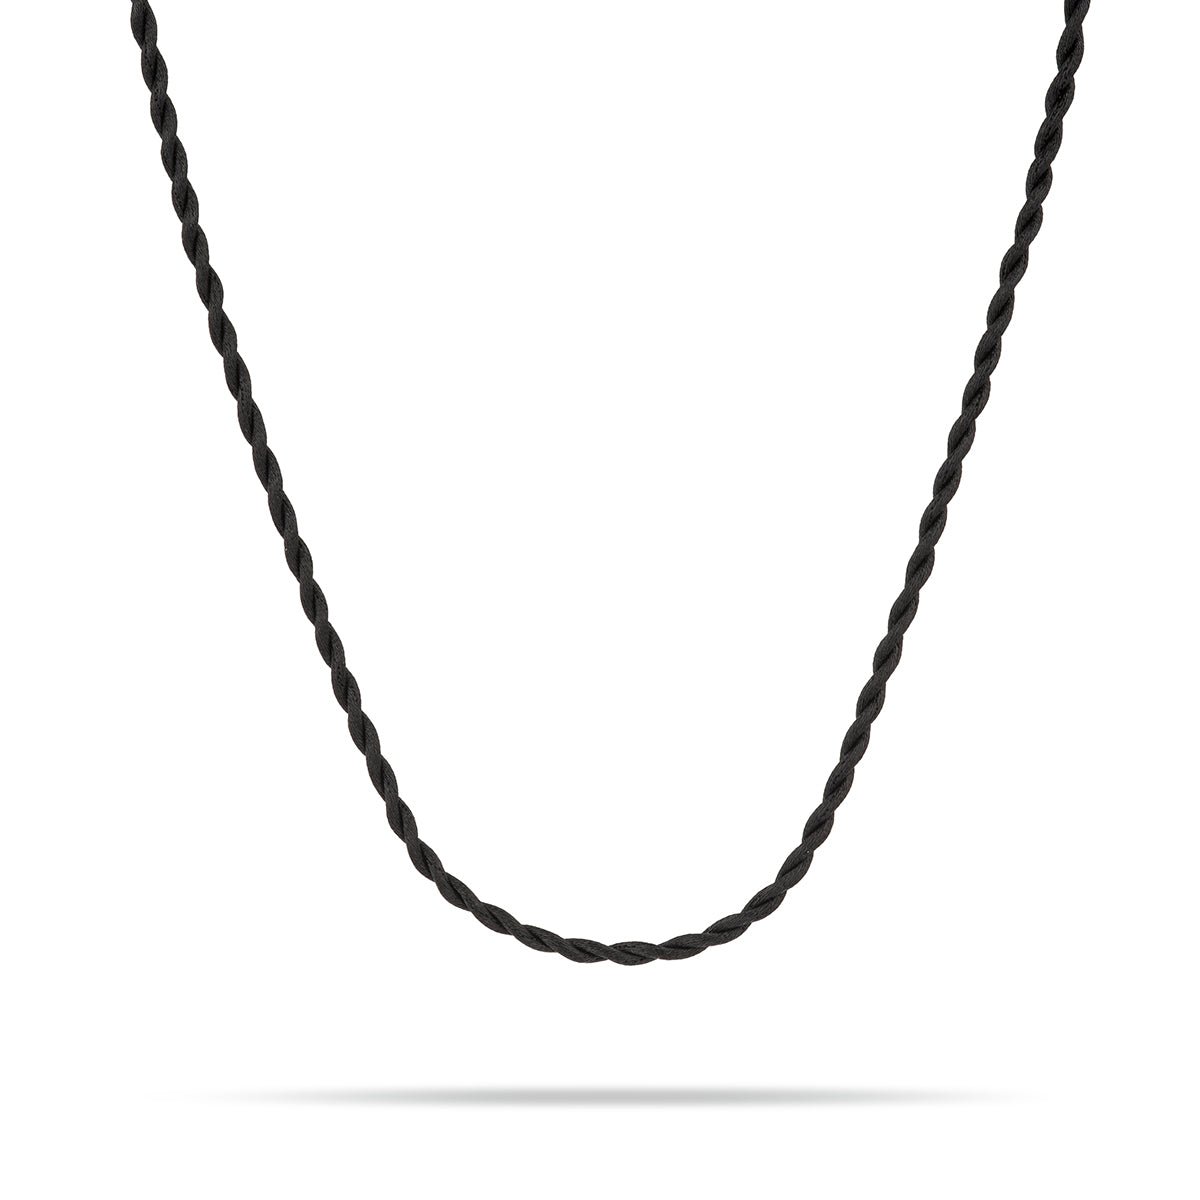 Braided Satin Nylon Cord Necklace - Black, 5mm Cord, 18 with Knot Closure